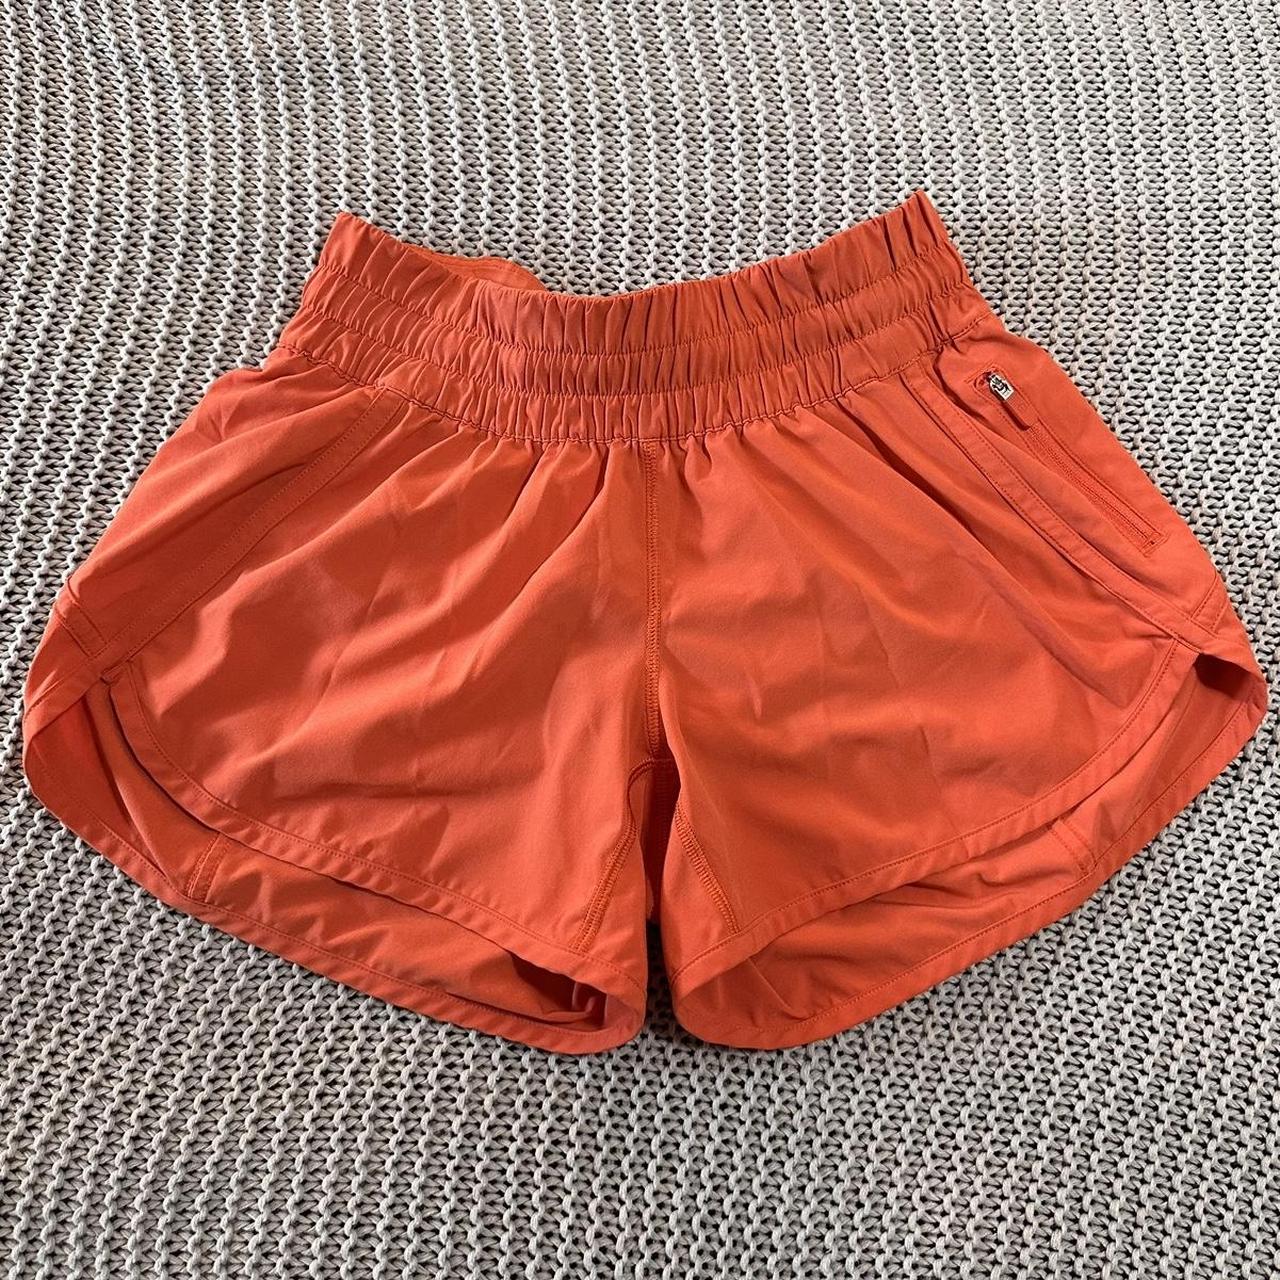 Lululemon tracker low-rise lined shorts with 4”